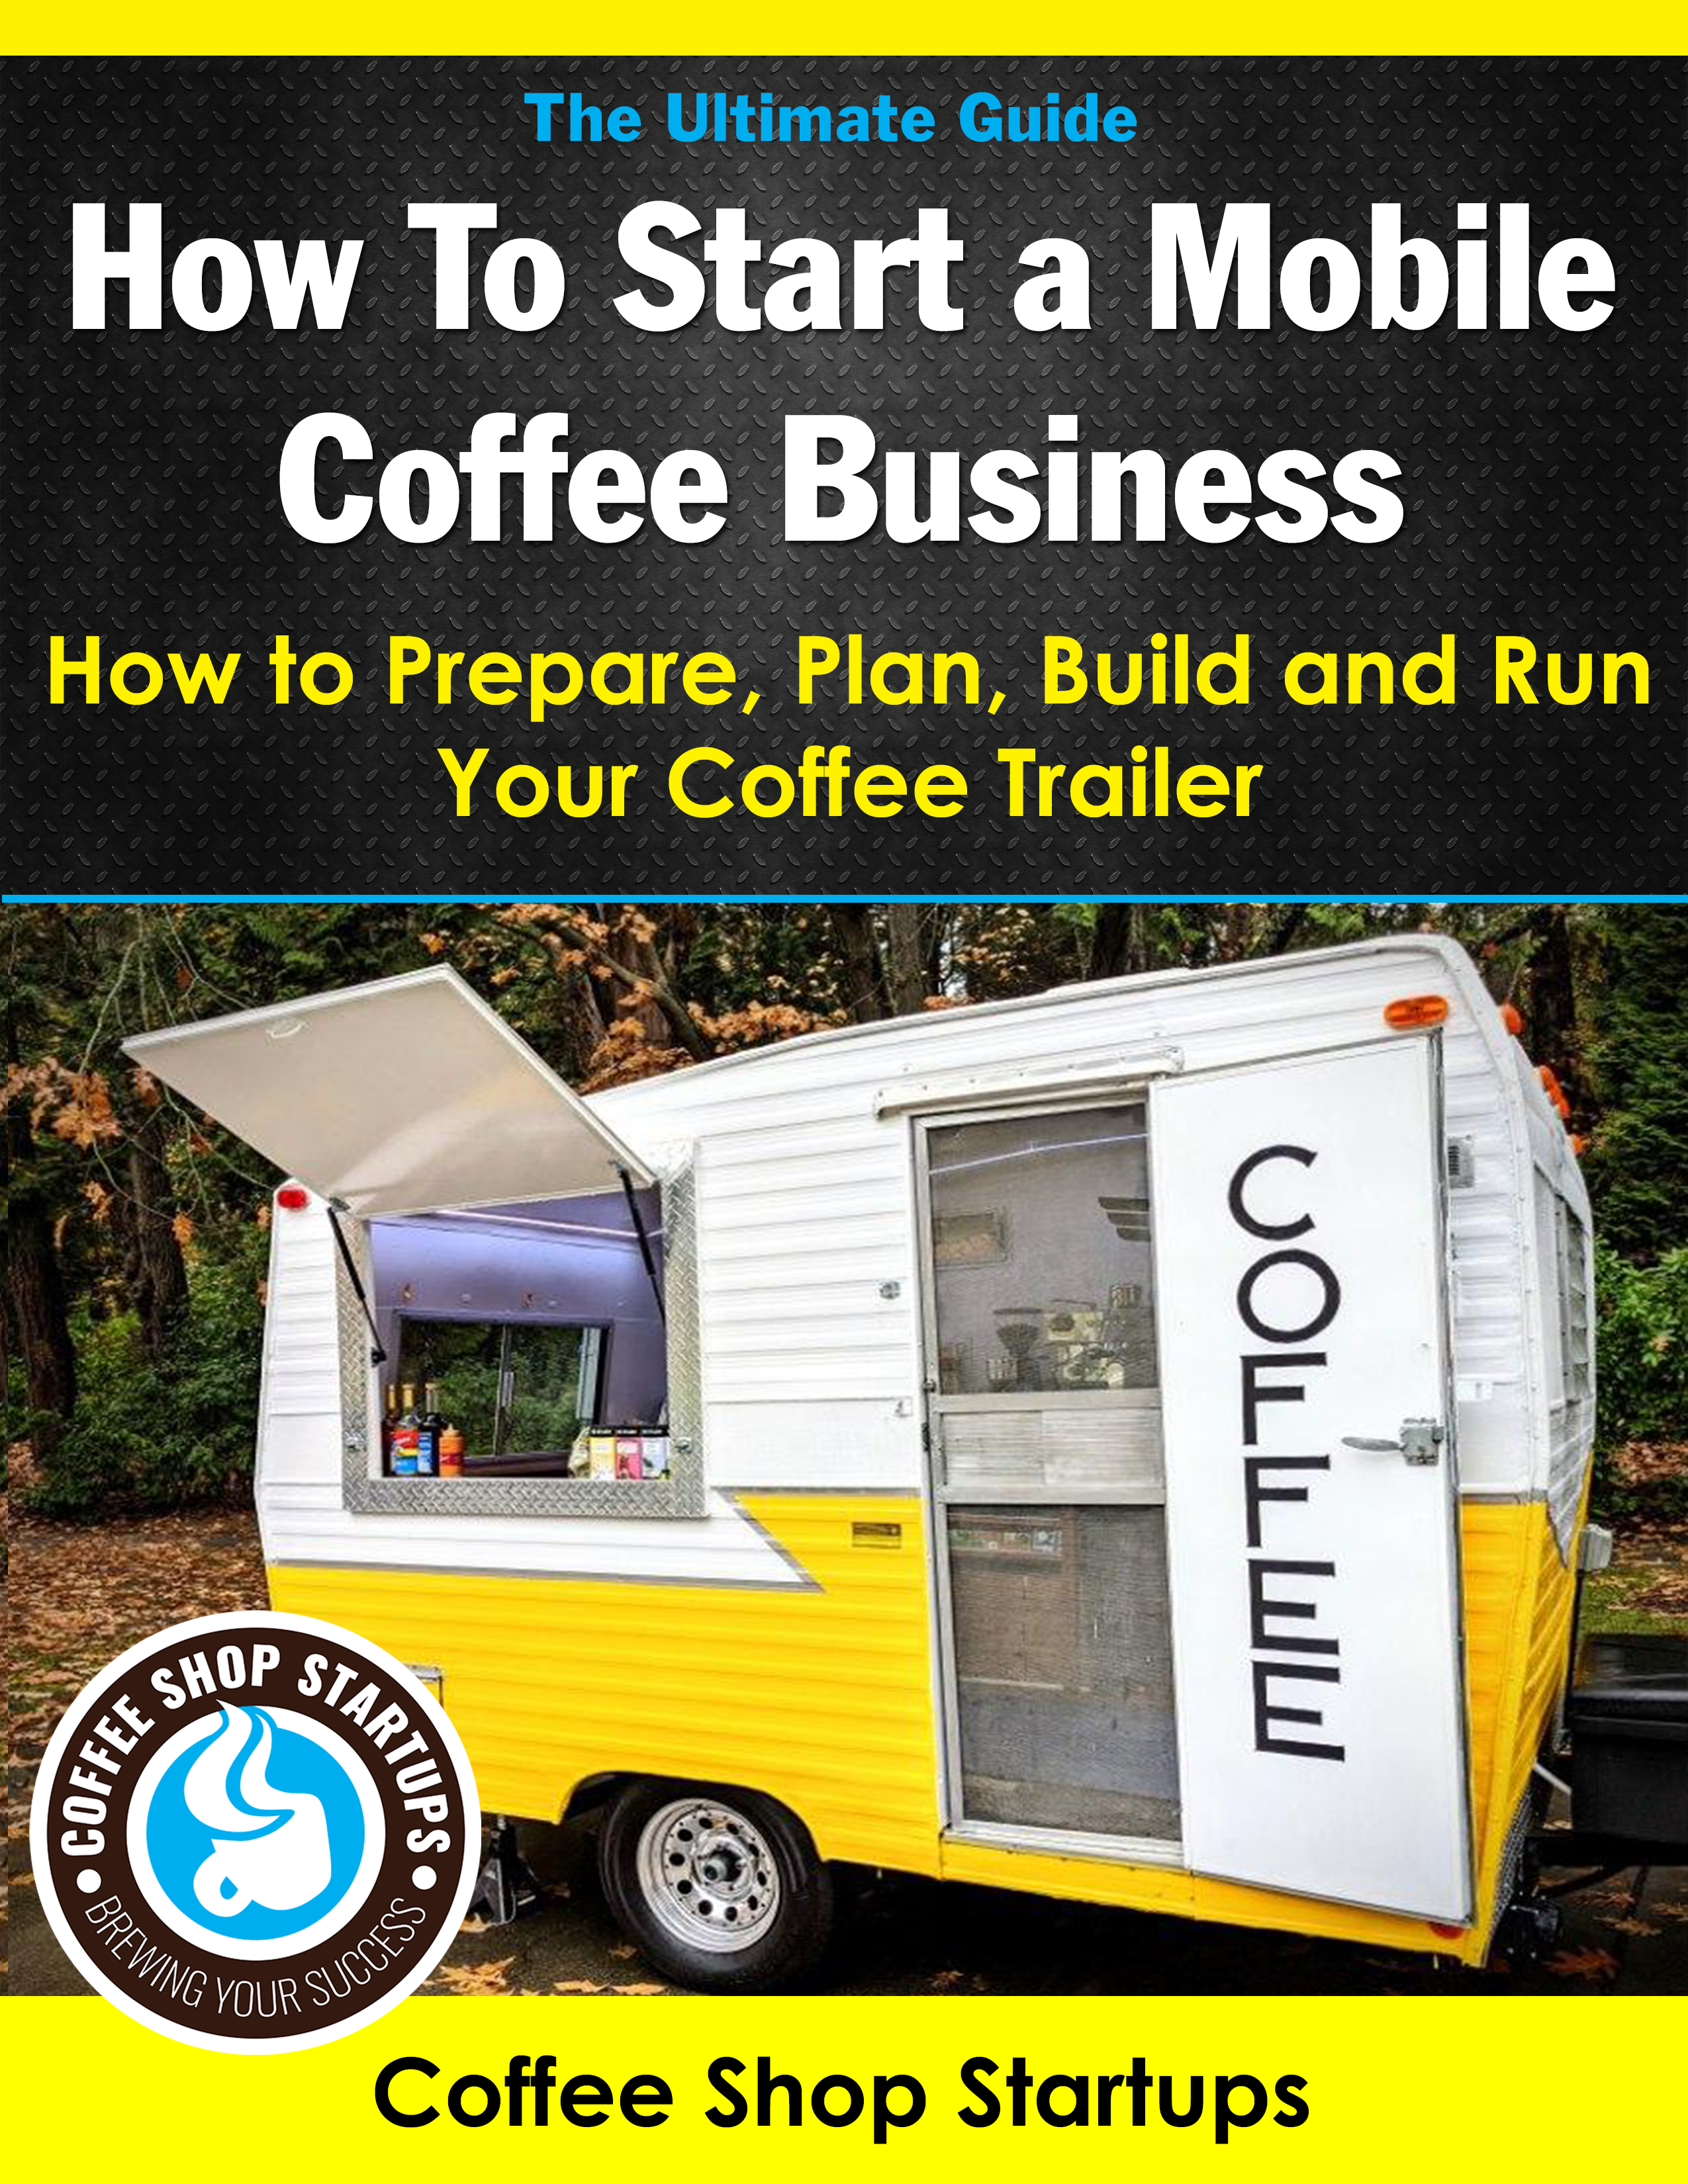 How to Start a Mobile Coffee Business Ebook